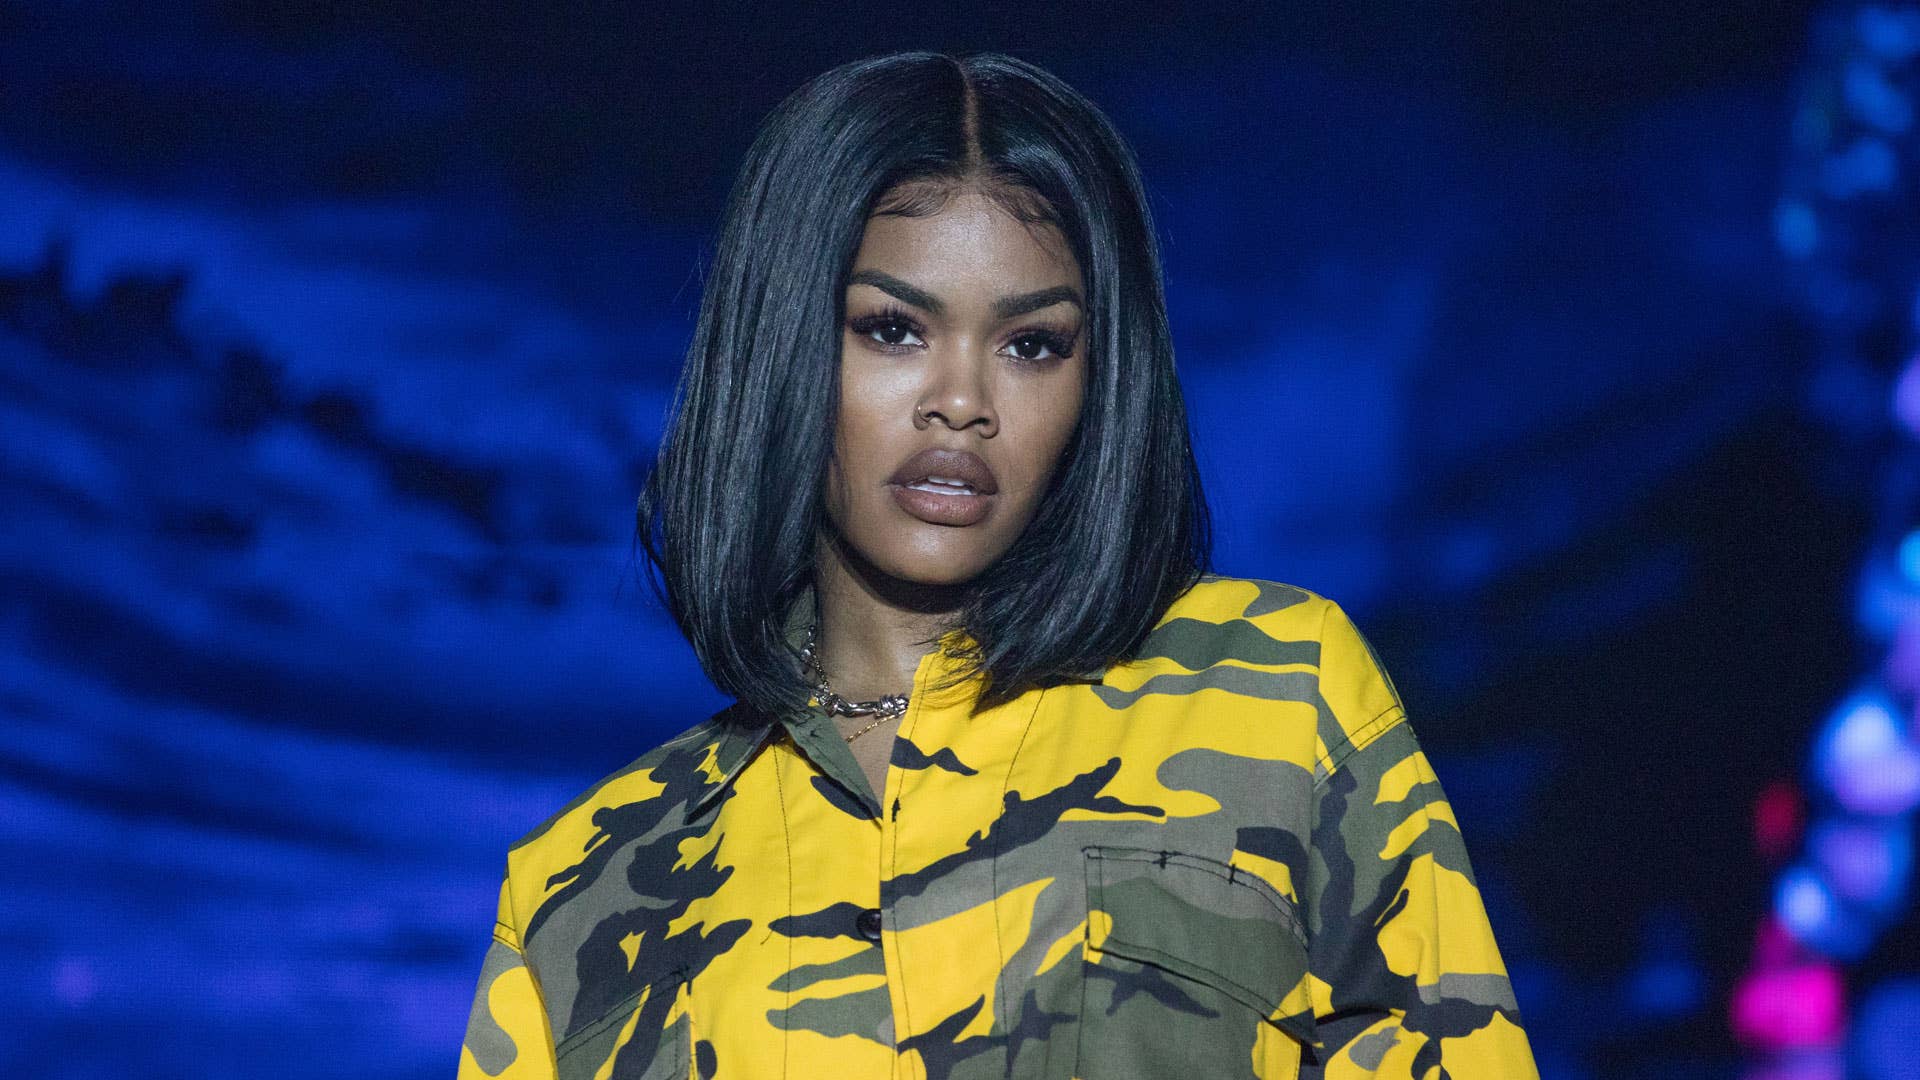 Teyana Taylor performs at the 'Keep the Promise' 2019 World AIDS Day Concert